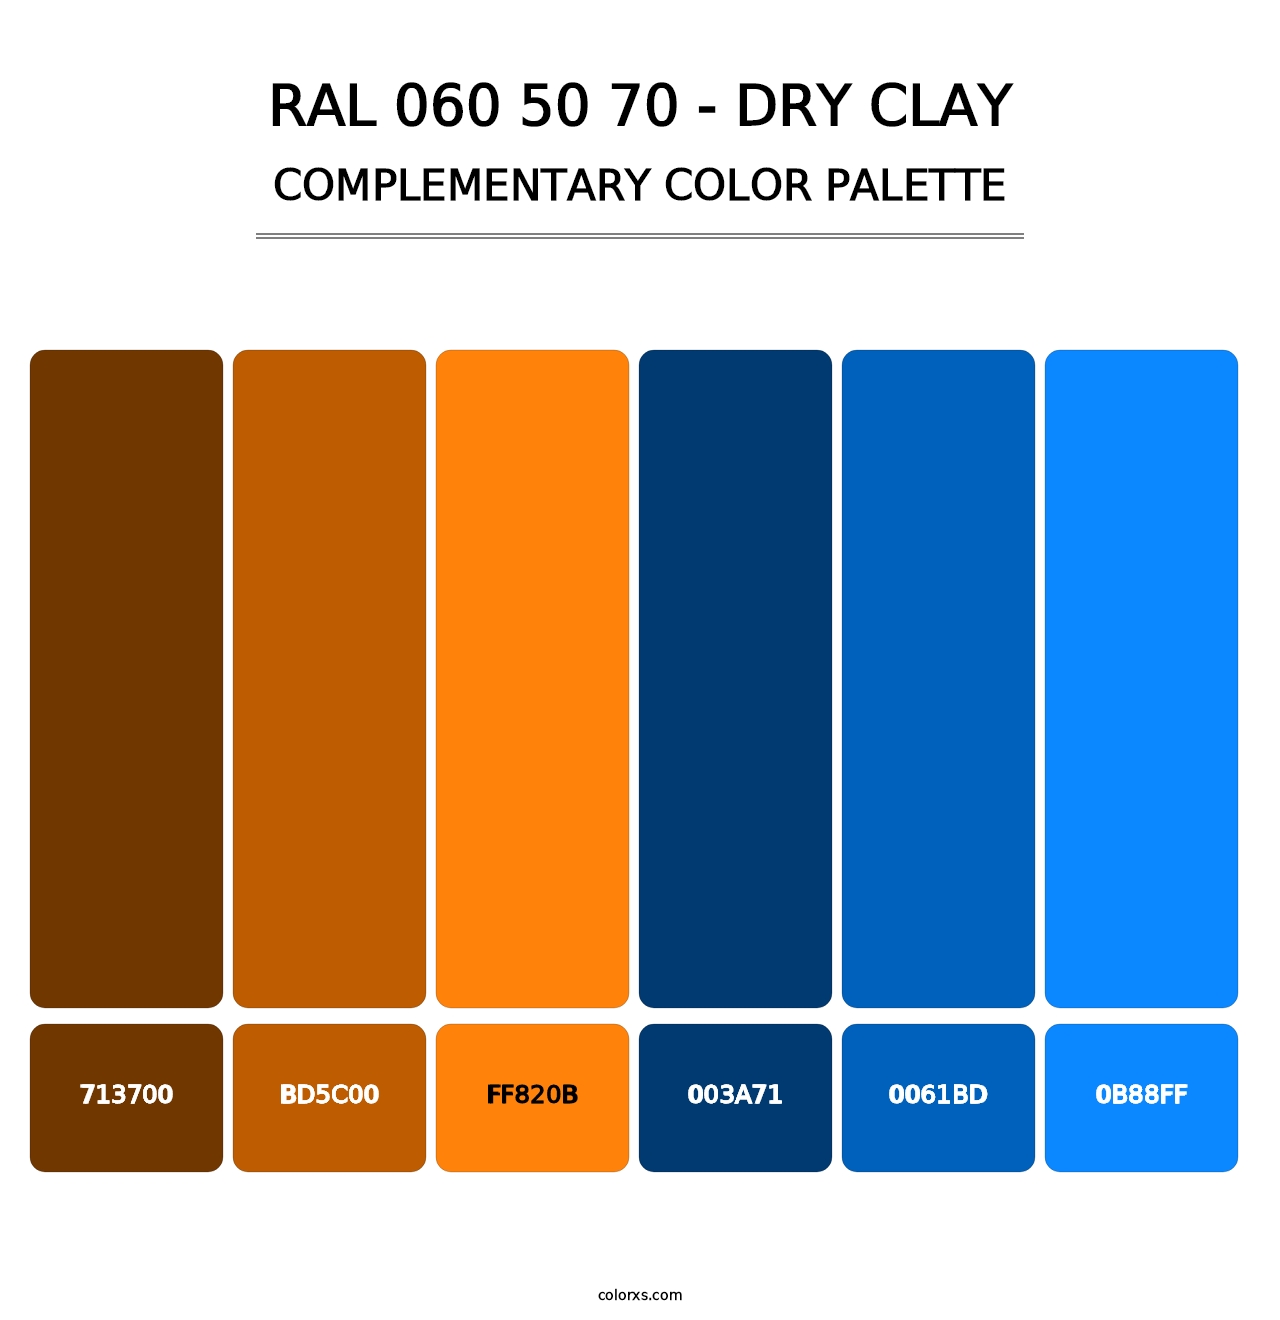 RAL 060 50 70 - Dry Clay - Complementary Color Palette